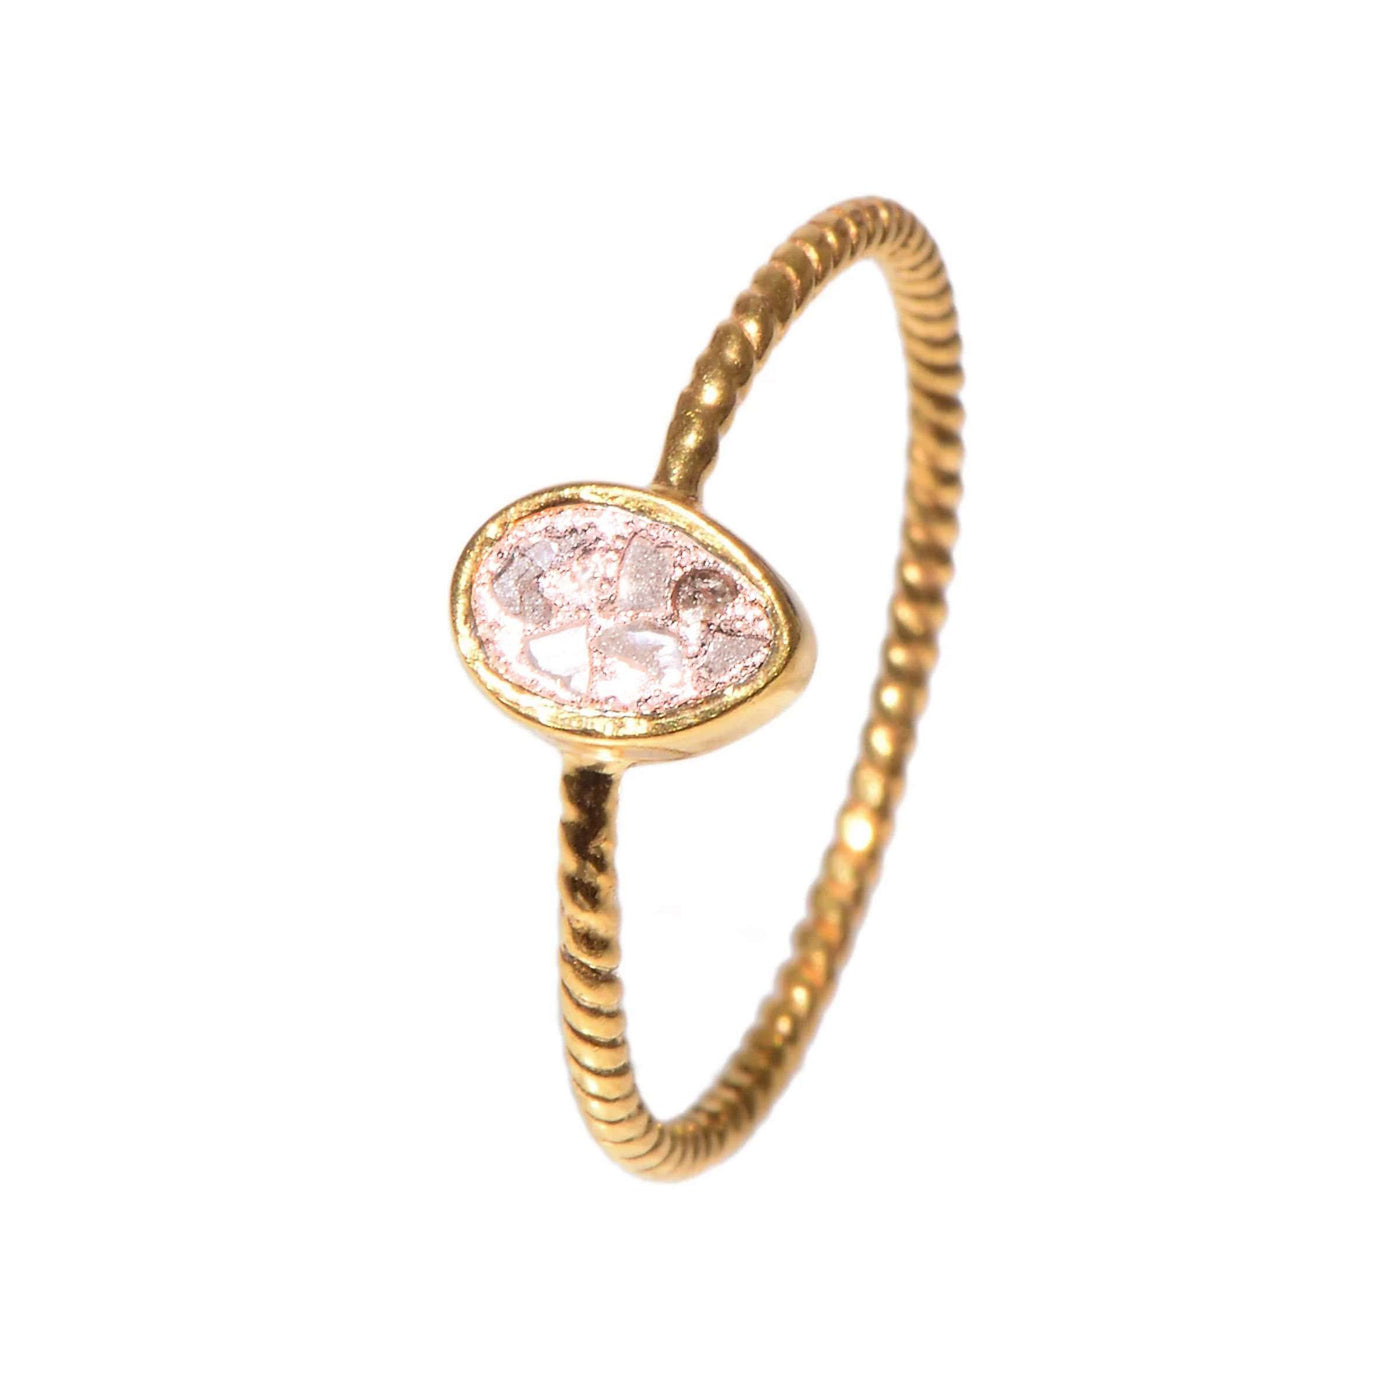 Raw Uncut Wire Gold Vermeil Ring